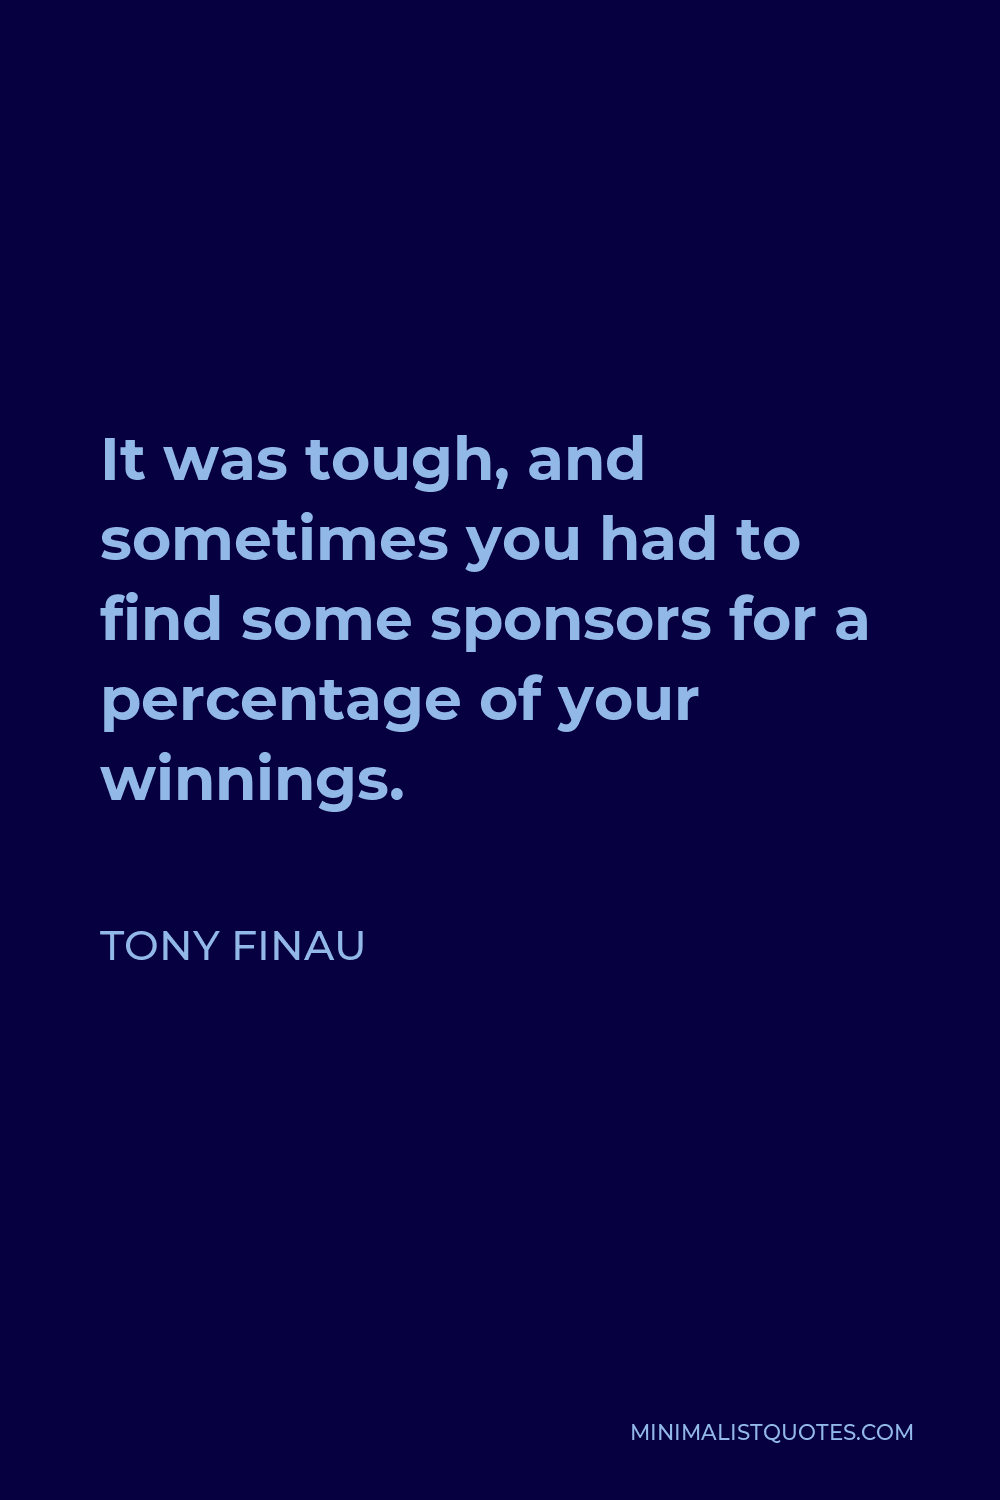 Tony Finau Quote - It was tough, and sometimes you had to find some sponsors for a percentage of your winnings.